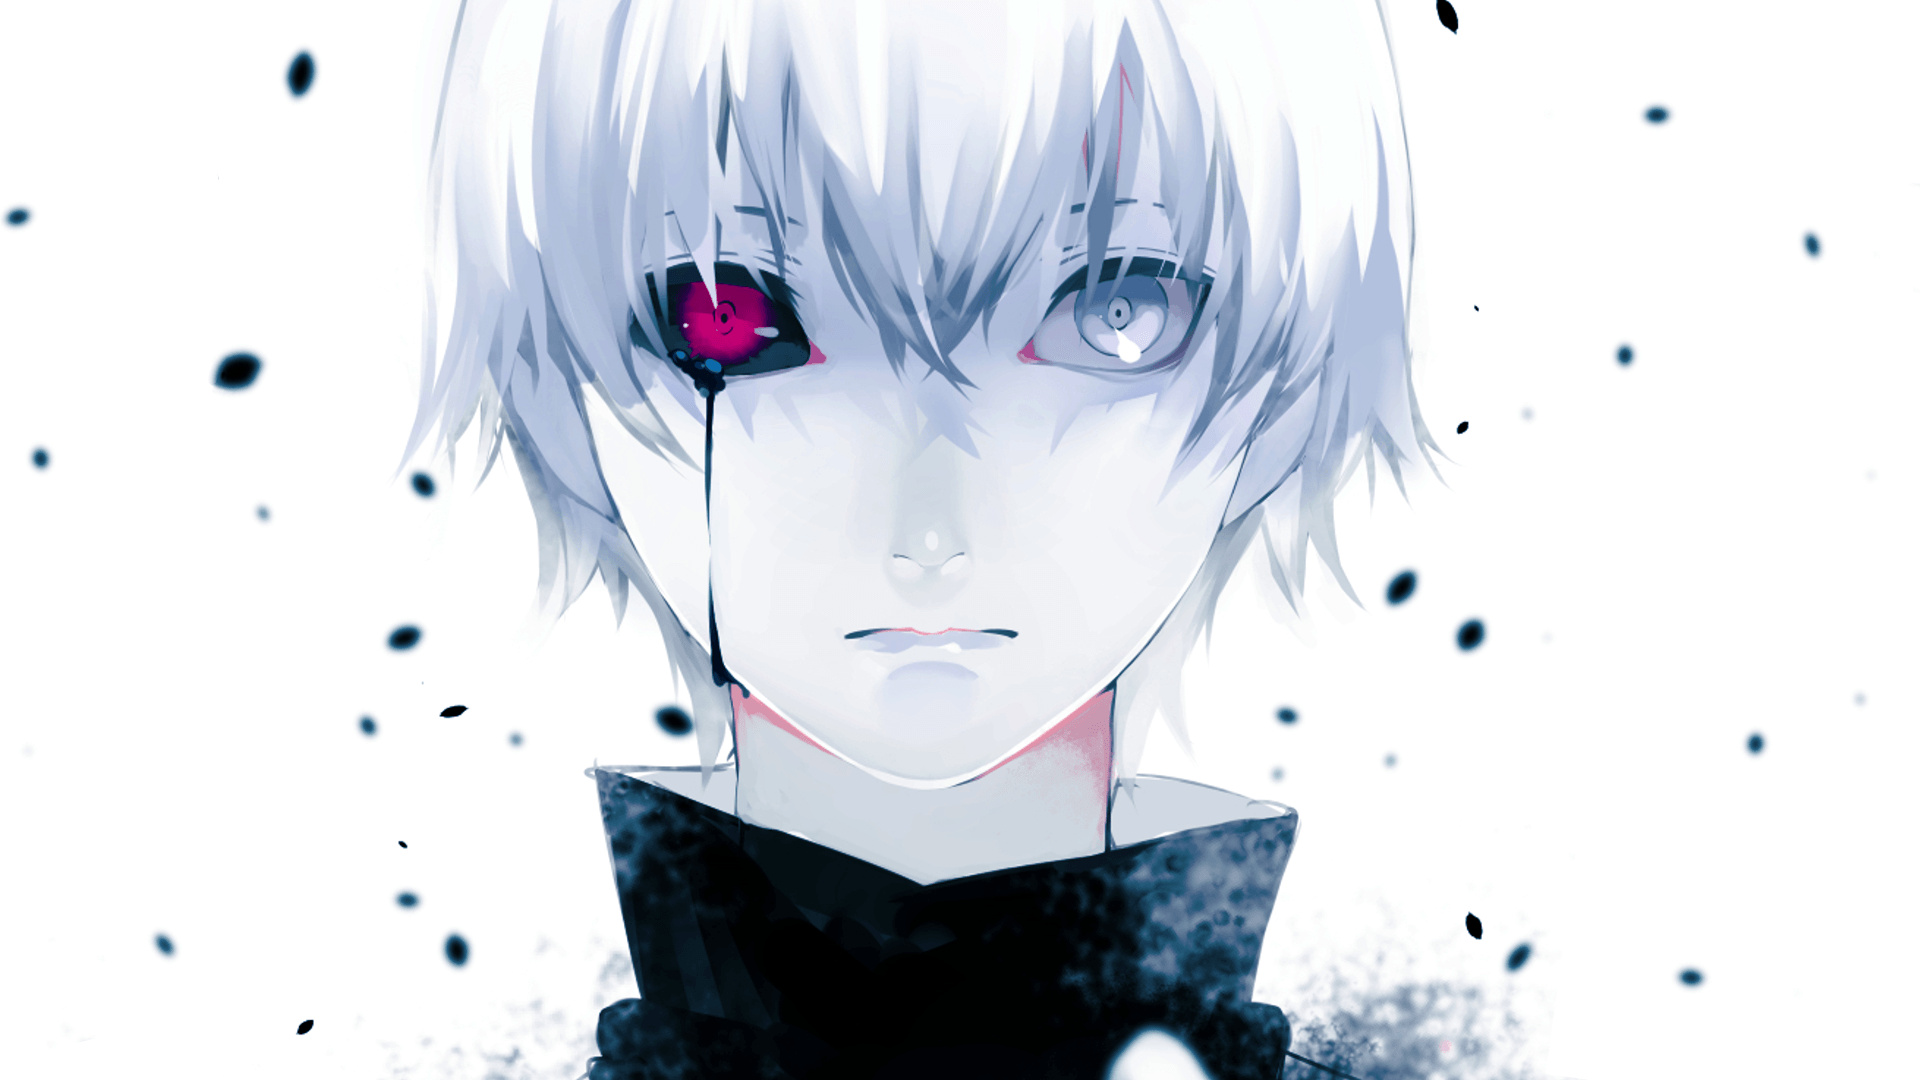 Tokyo Ghoul, Anime HD wallpapers, Free backgrounds, 1920x1080 Full HD Desktop